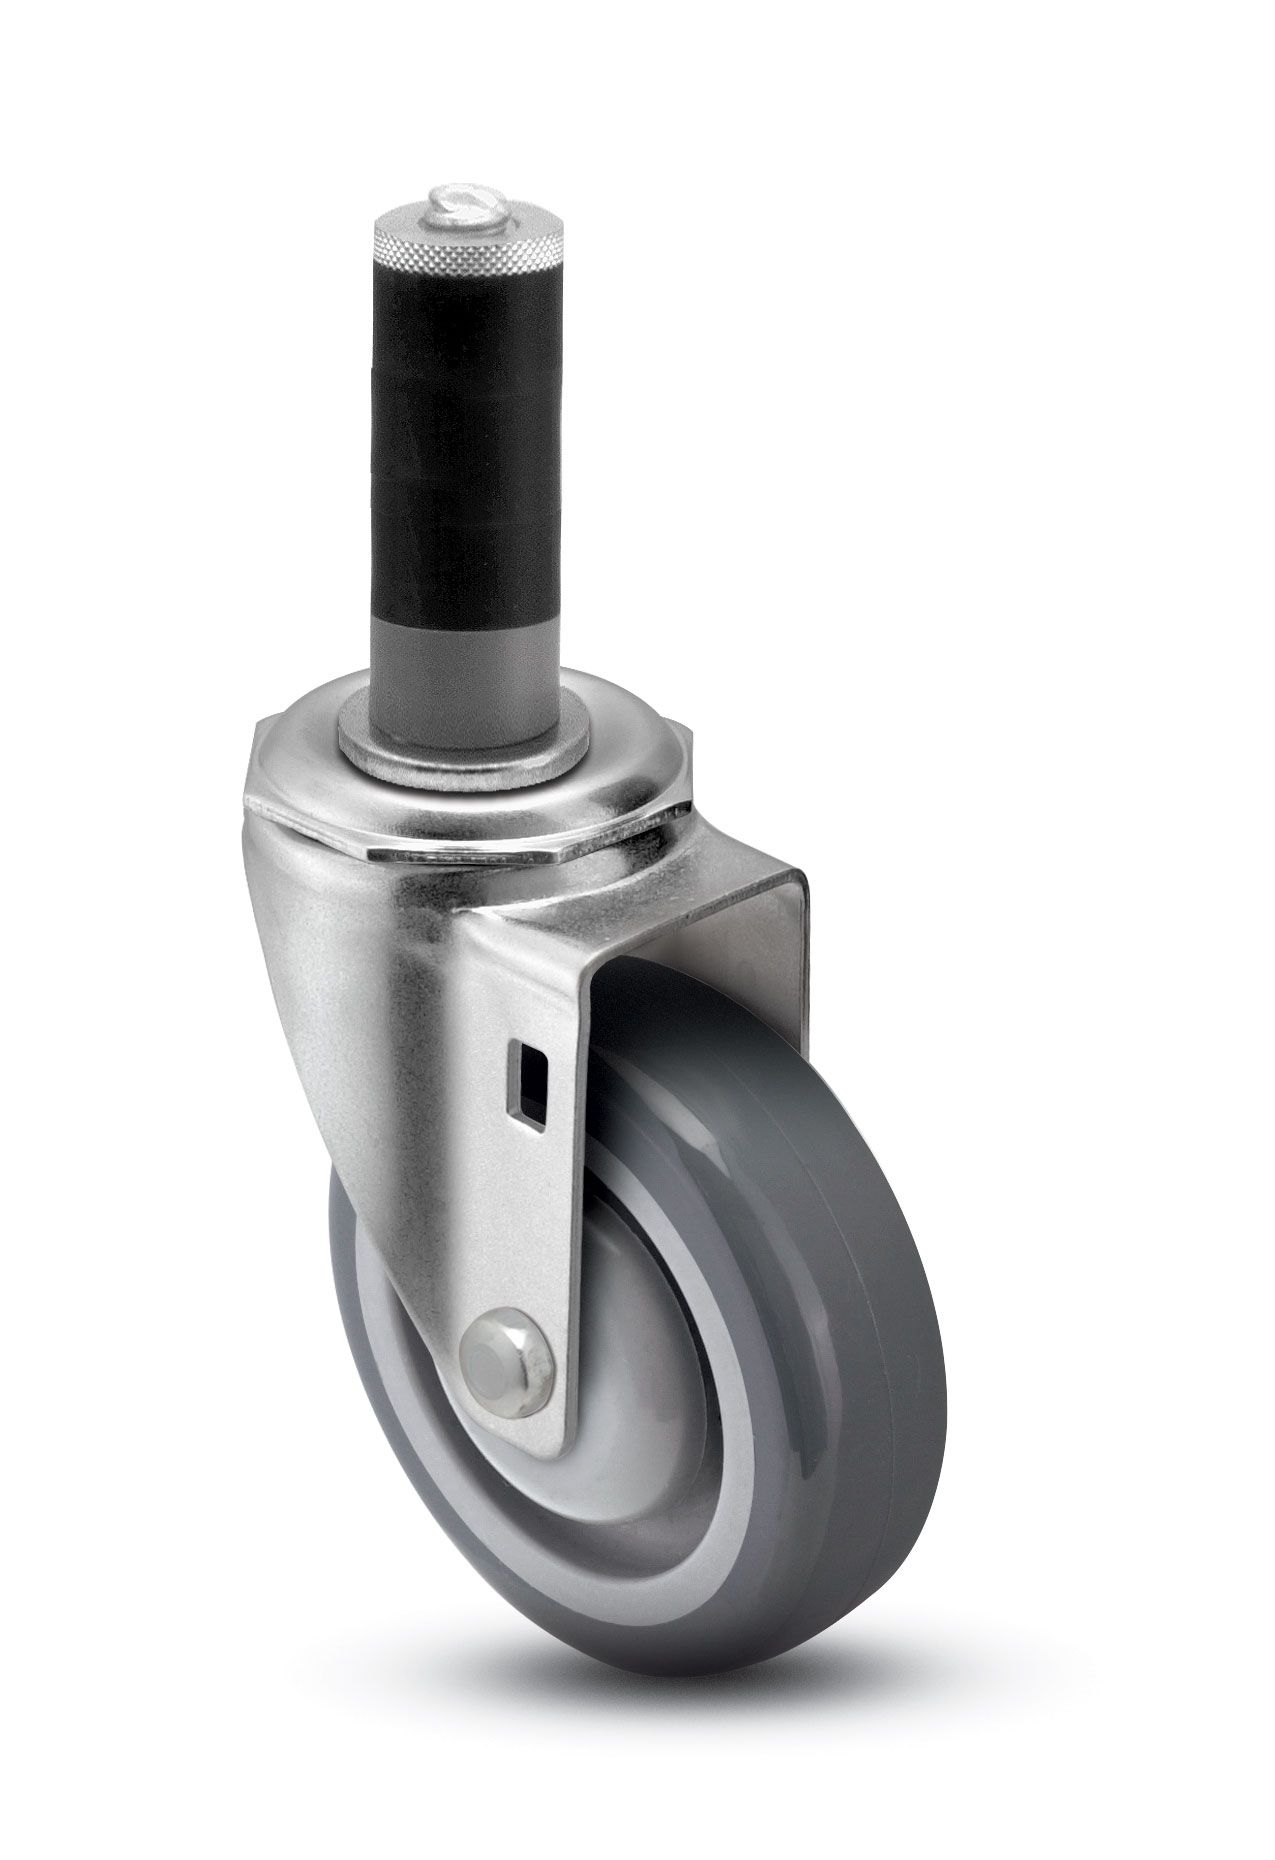 Caster; Swivel; 4" x 1-1/4"; PolyU on PolyO (Gray); Expandable Adapter (Round for 1" - 1-1/16" ID tubing); Zinc; Prec Ball Brng; 300#; Dust Cover; Total Lock (Item #63854)